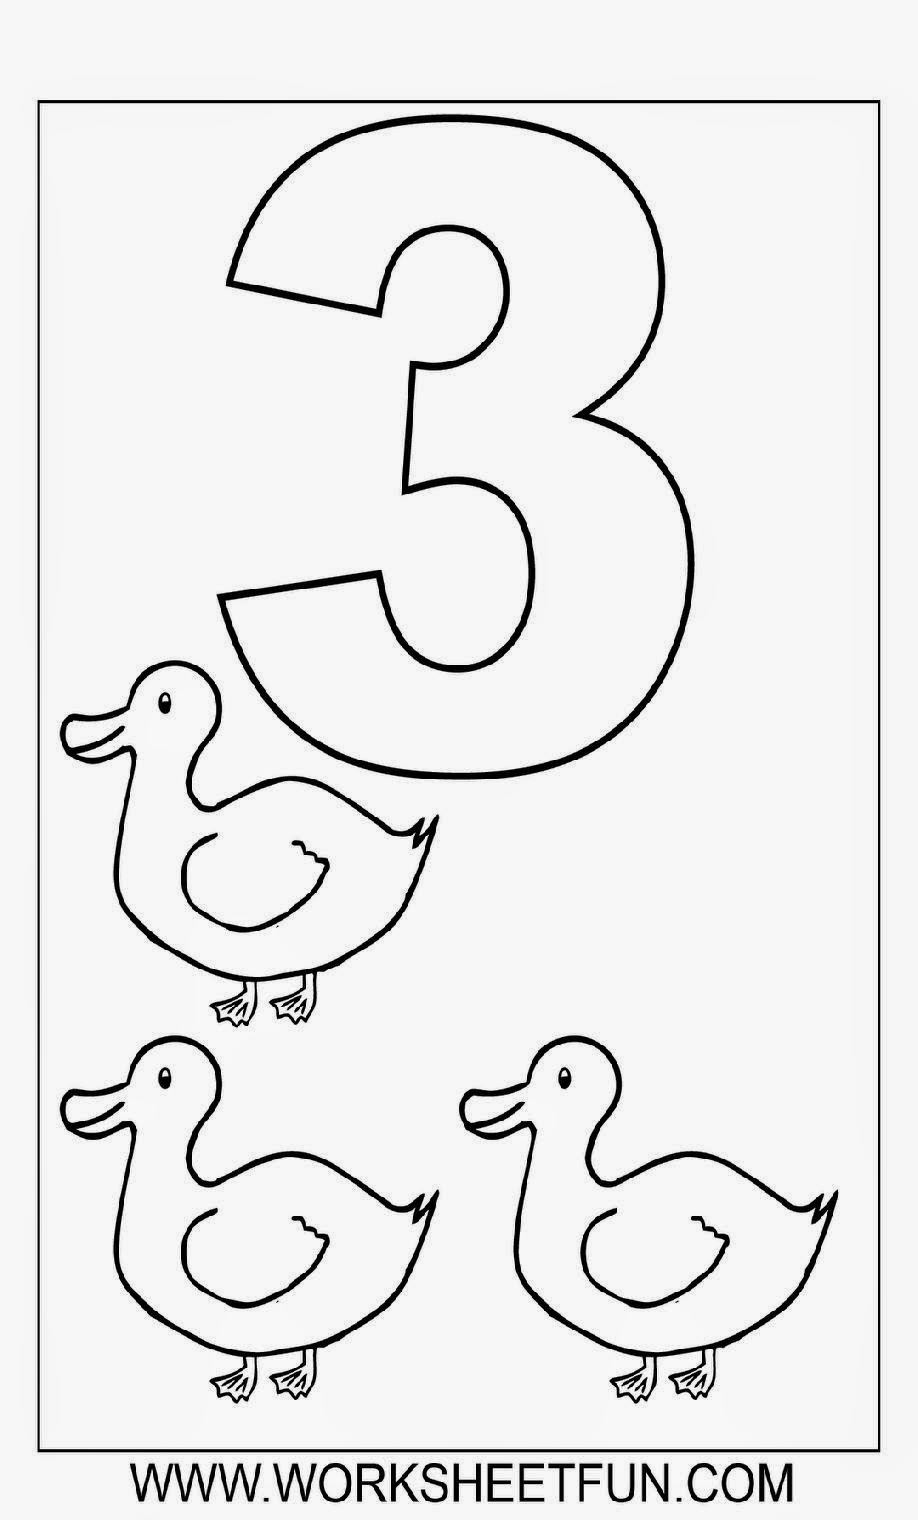 count-by-number-coloring-pages-free-coloring-pages